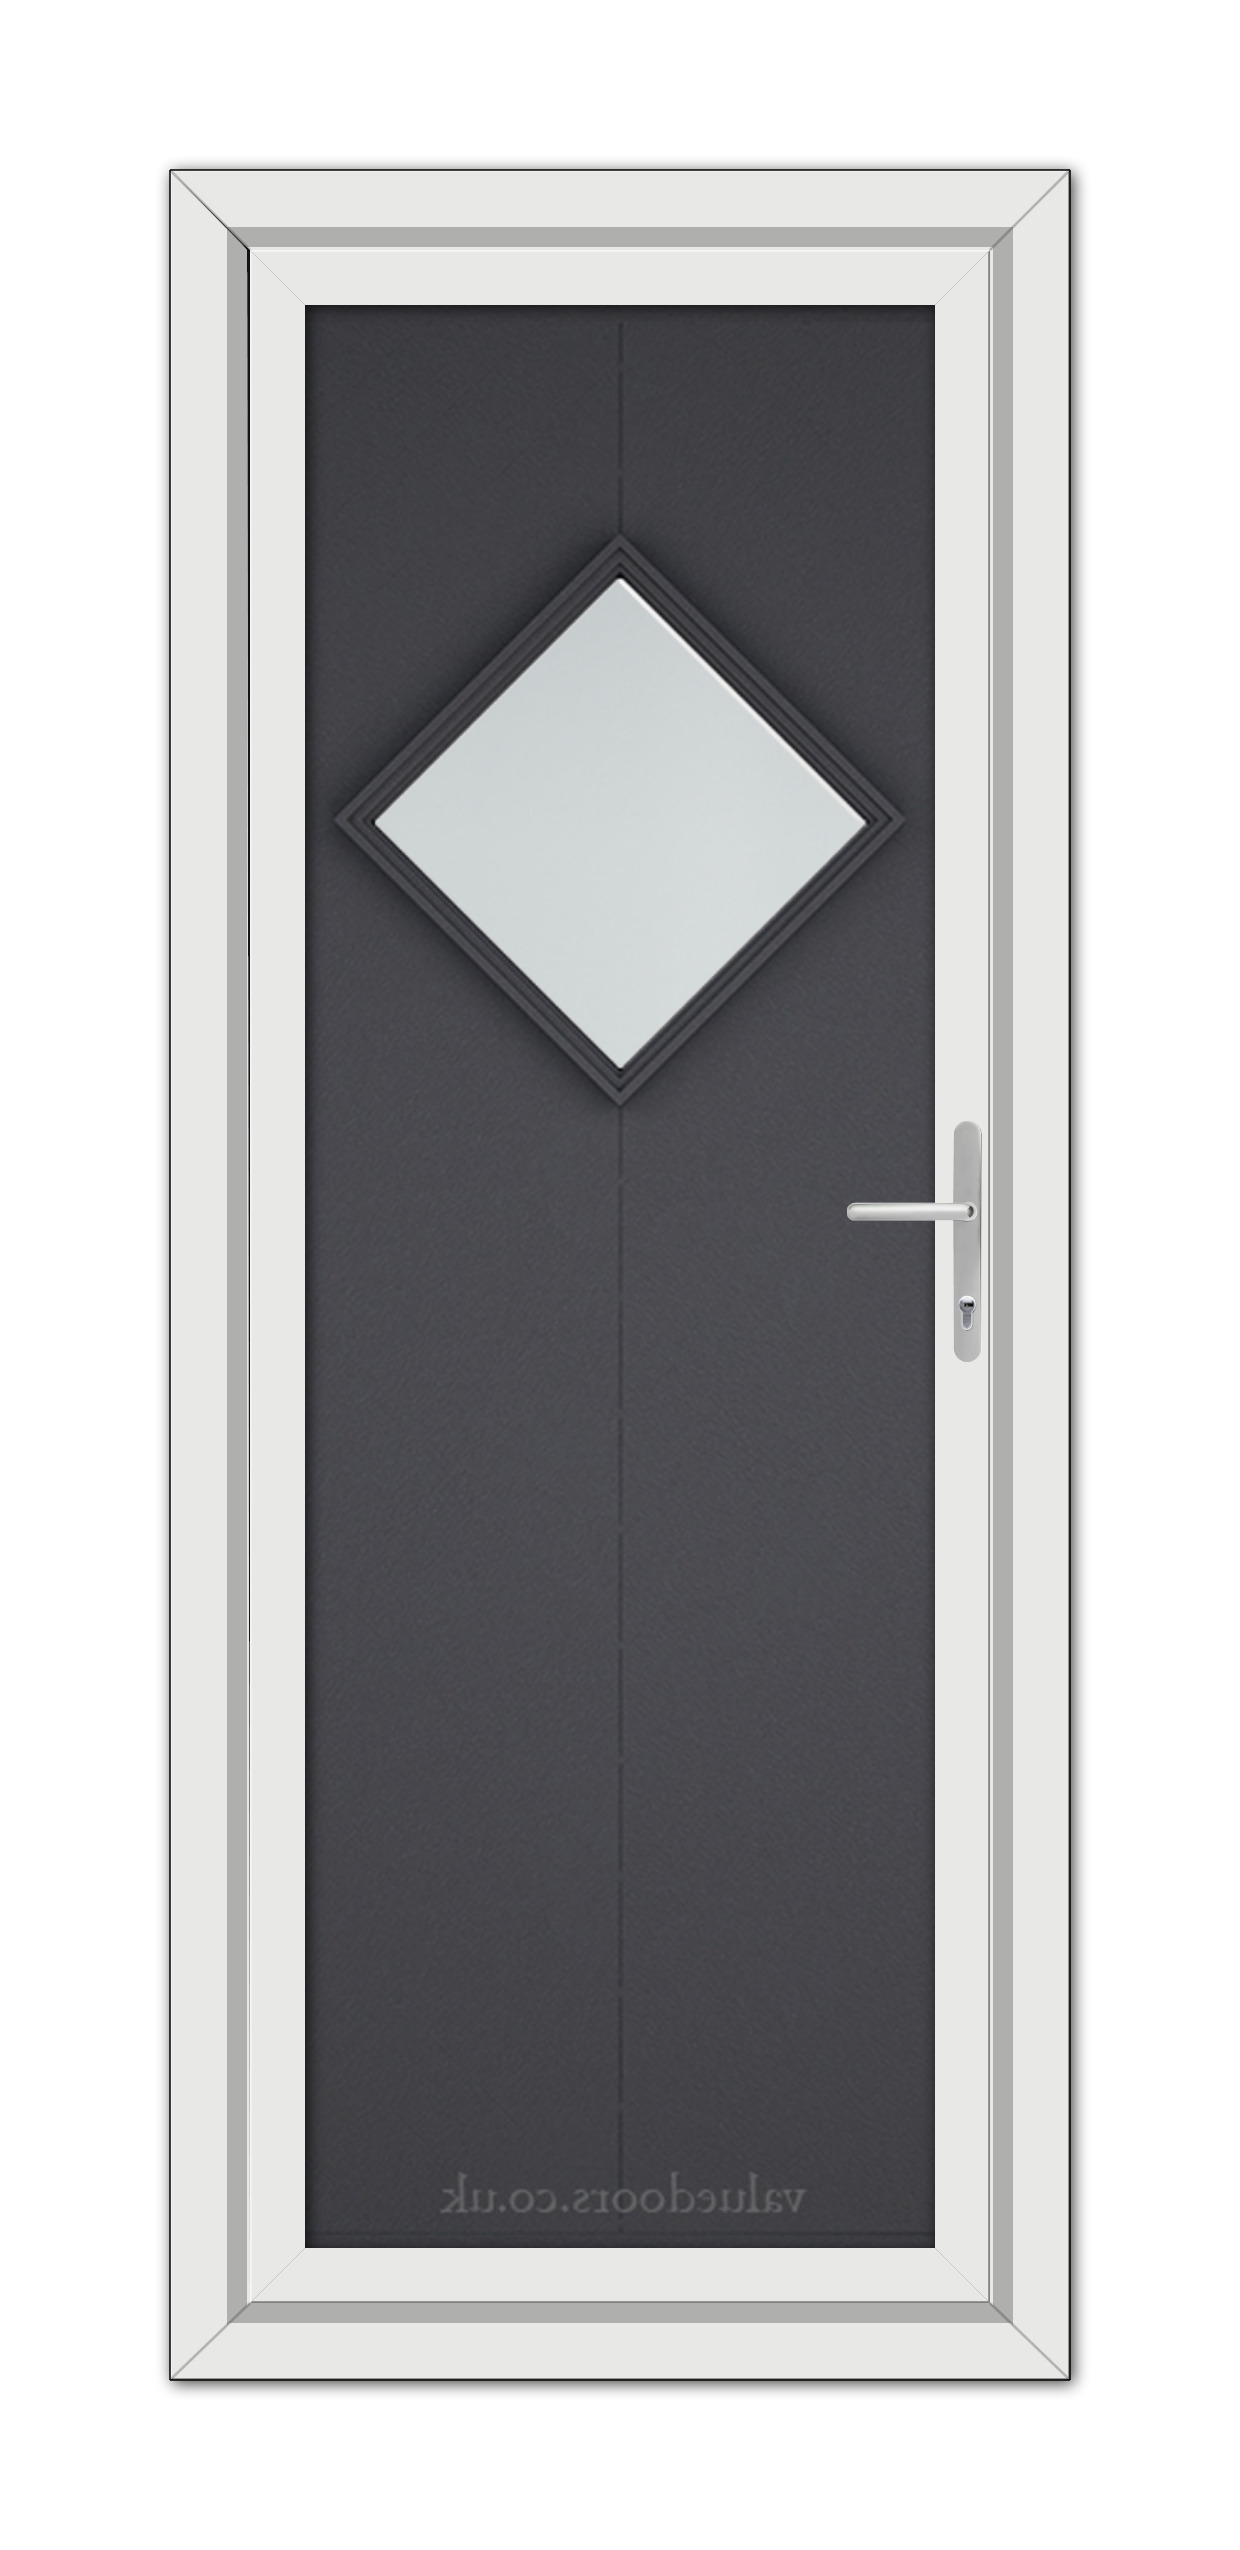 Modern Grey Grained Hamburg uPVC door with a diamond-shaped window and silver handle, framed in white.